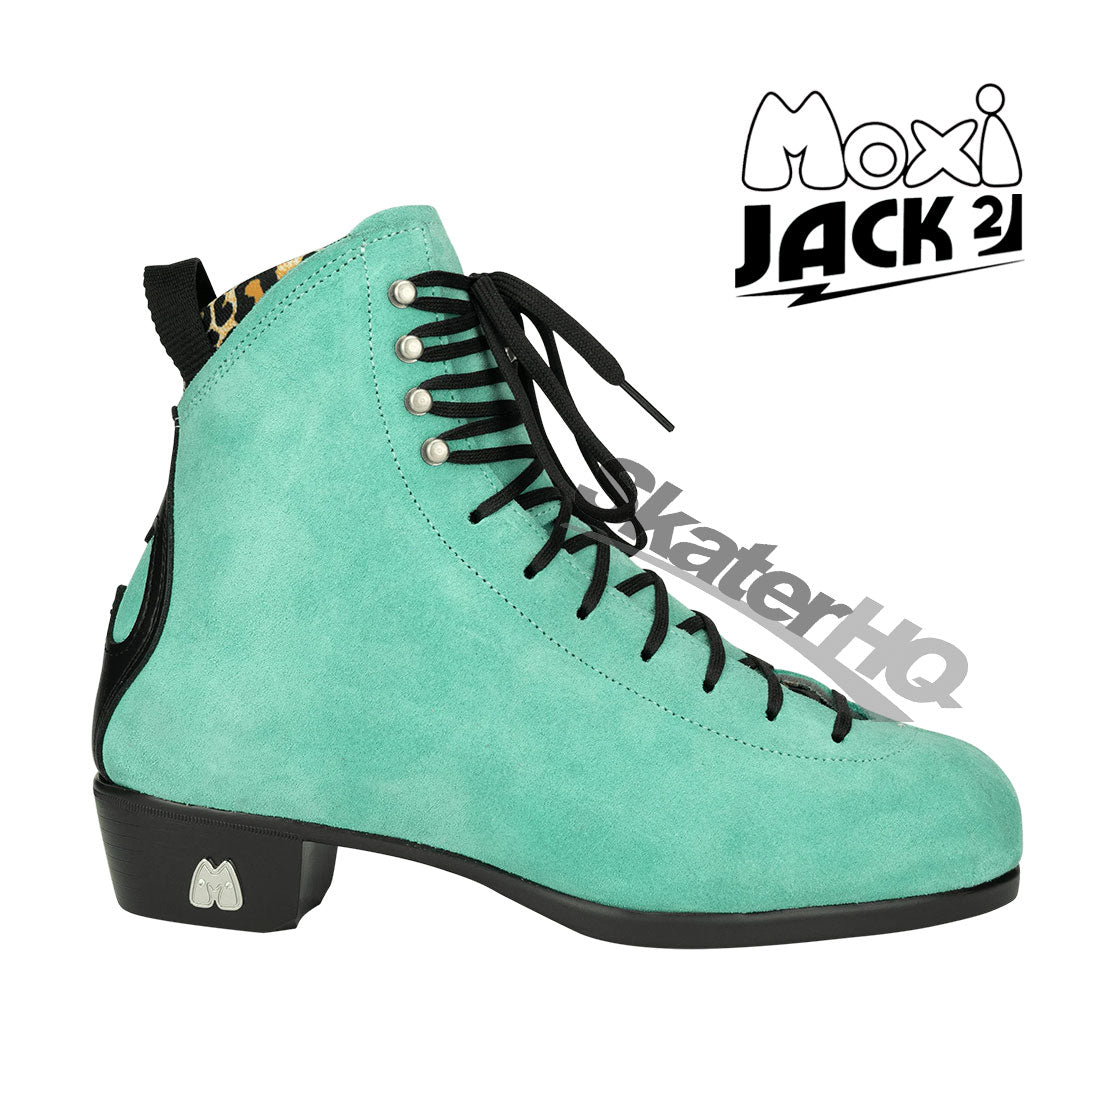 Moxi Jack 2 Boot - Special - Floss Teal Roller Skate Boots